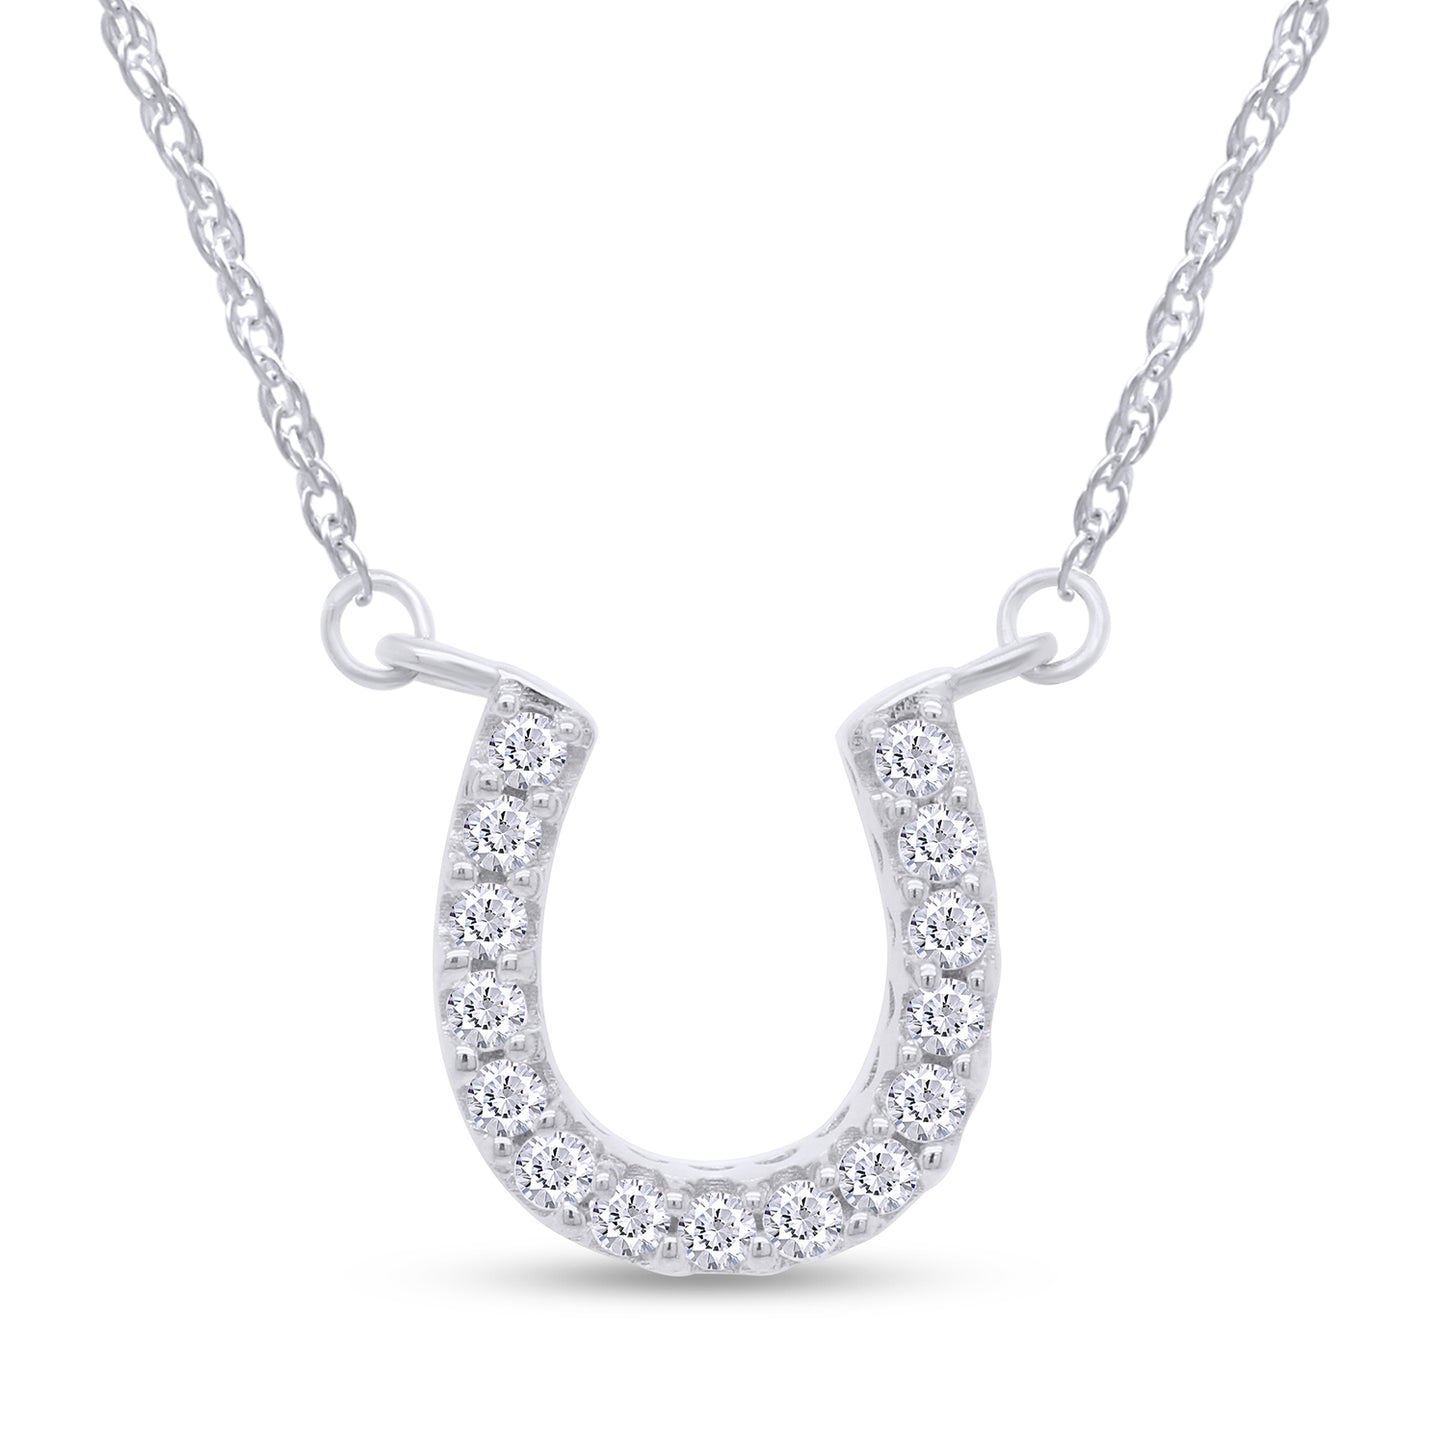 Load image into Gallery viewer, Round Cut White Cubic Zirconia Horseshoe Pendant Necklace For Women In 925 Sterling Silver
